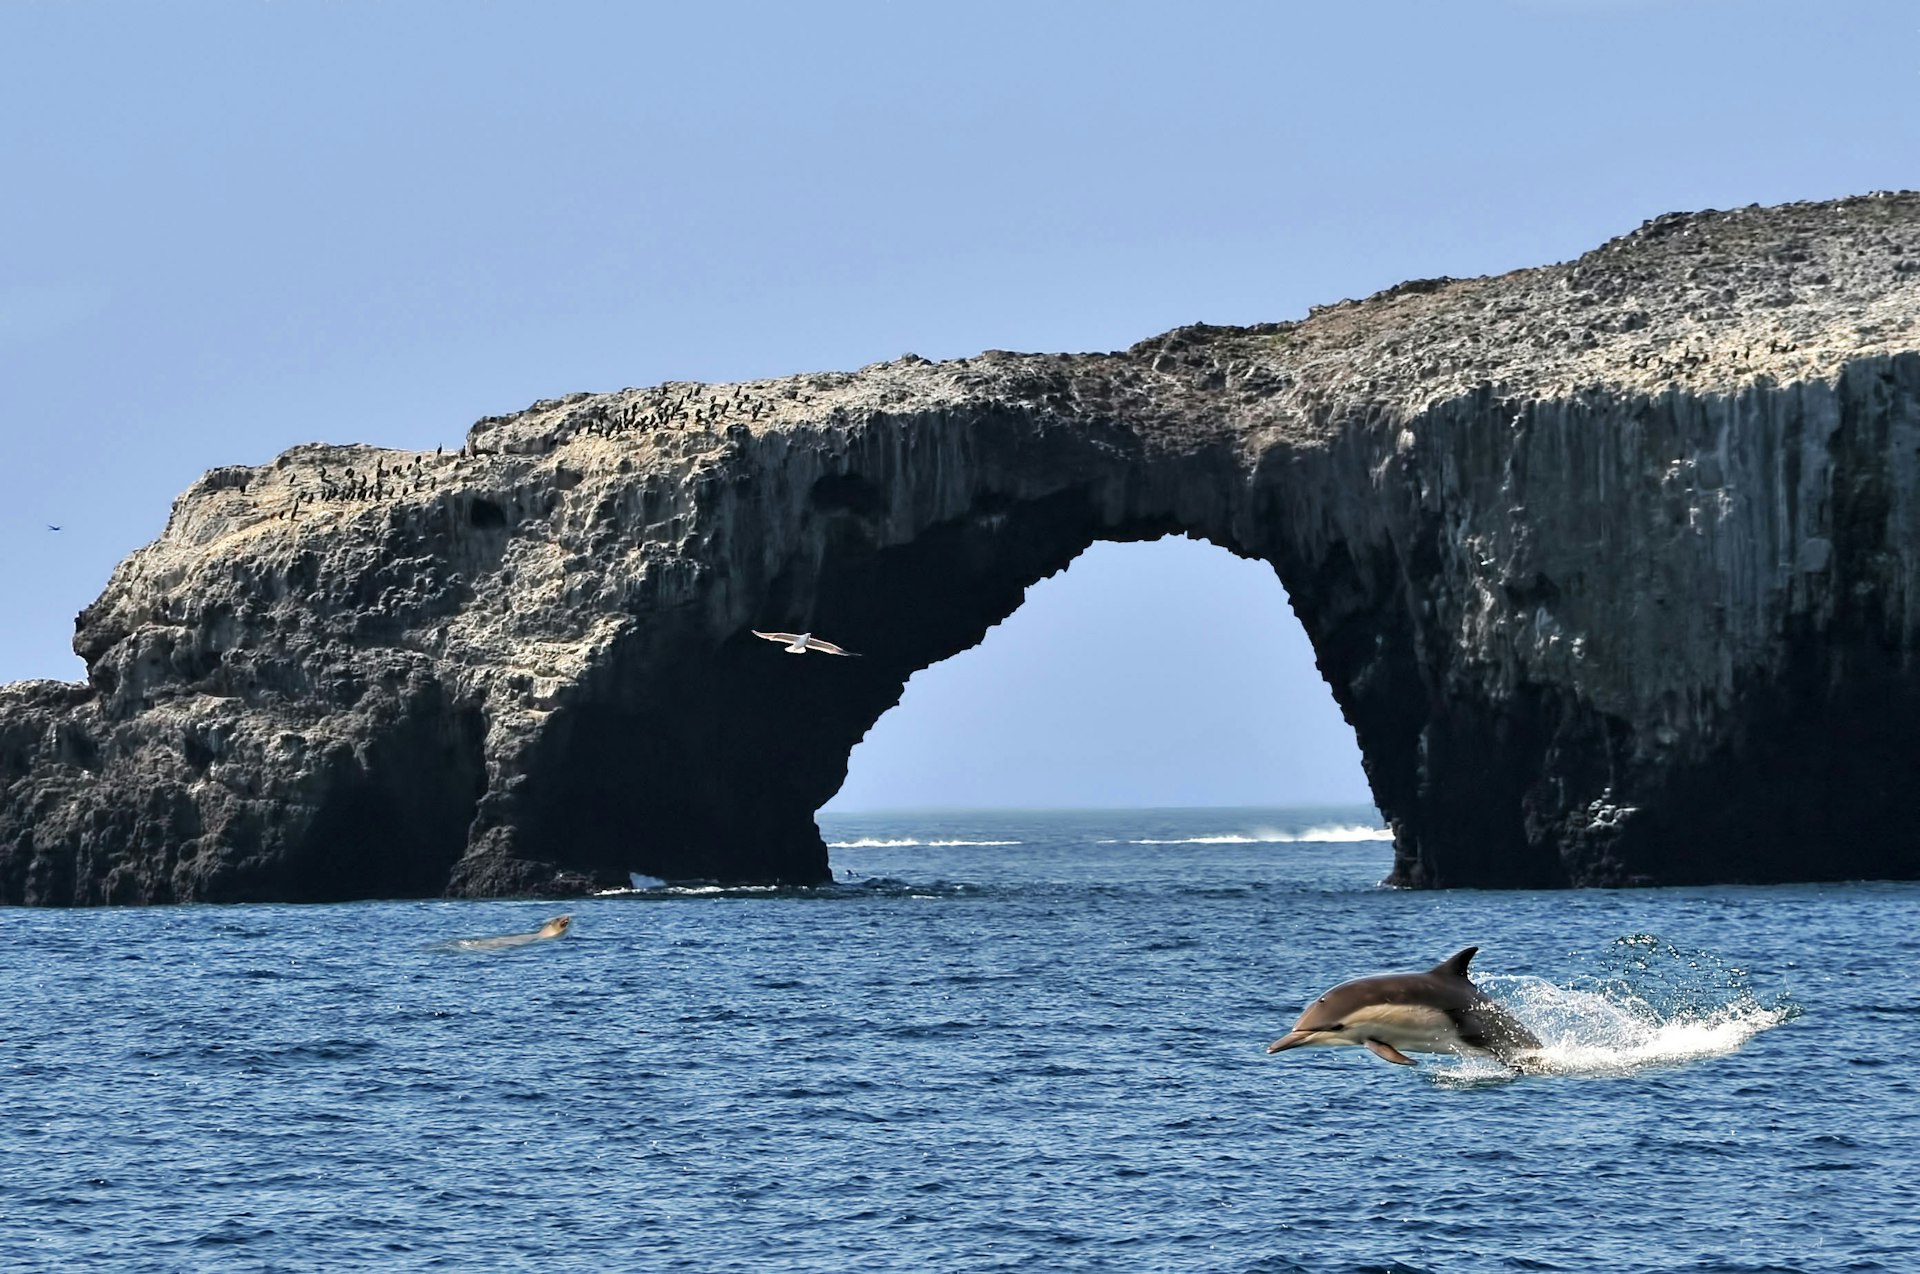 Dolphin jumping out of the water in front of a rock arch formation